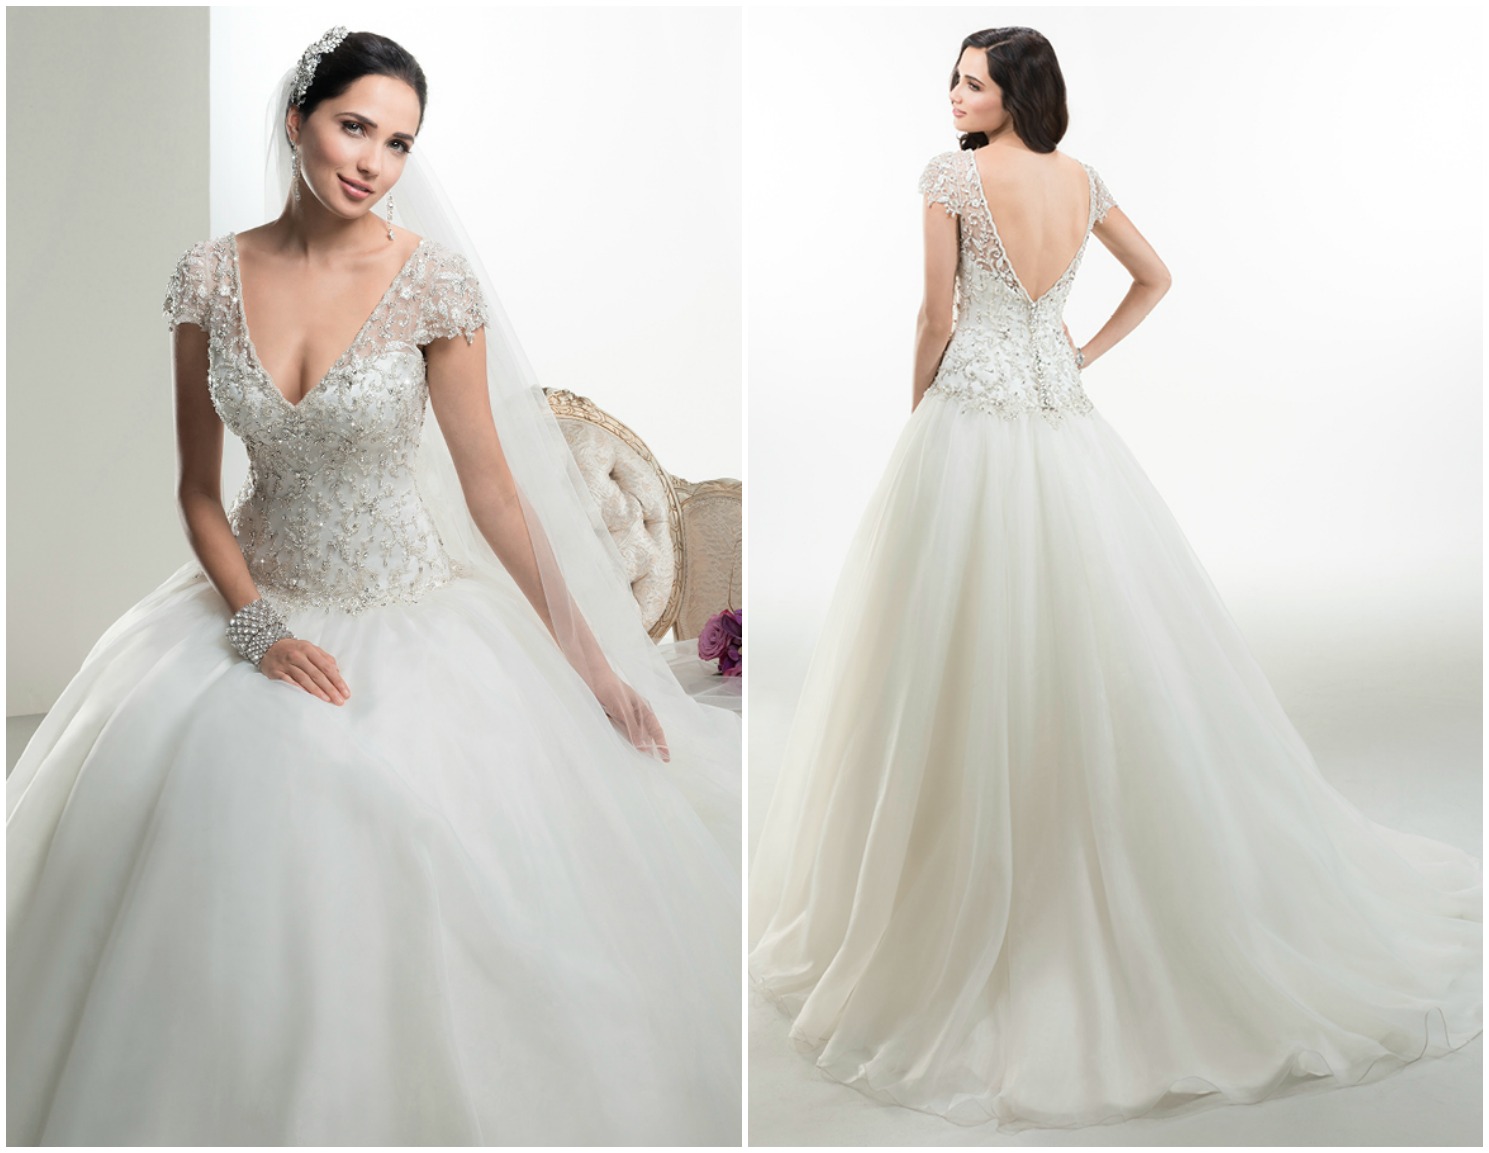 <a href="http://www.maggiesottero.com/dress.aspx?style=4MT921" target="_blank">Maggie Sottero</a>